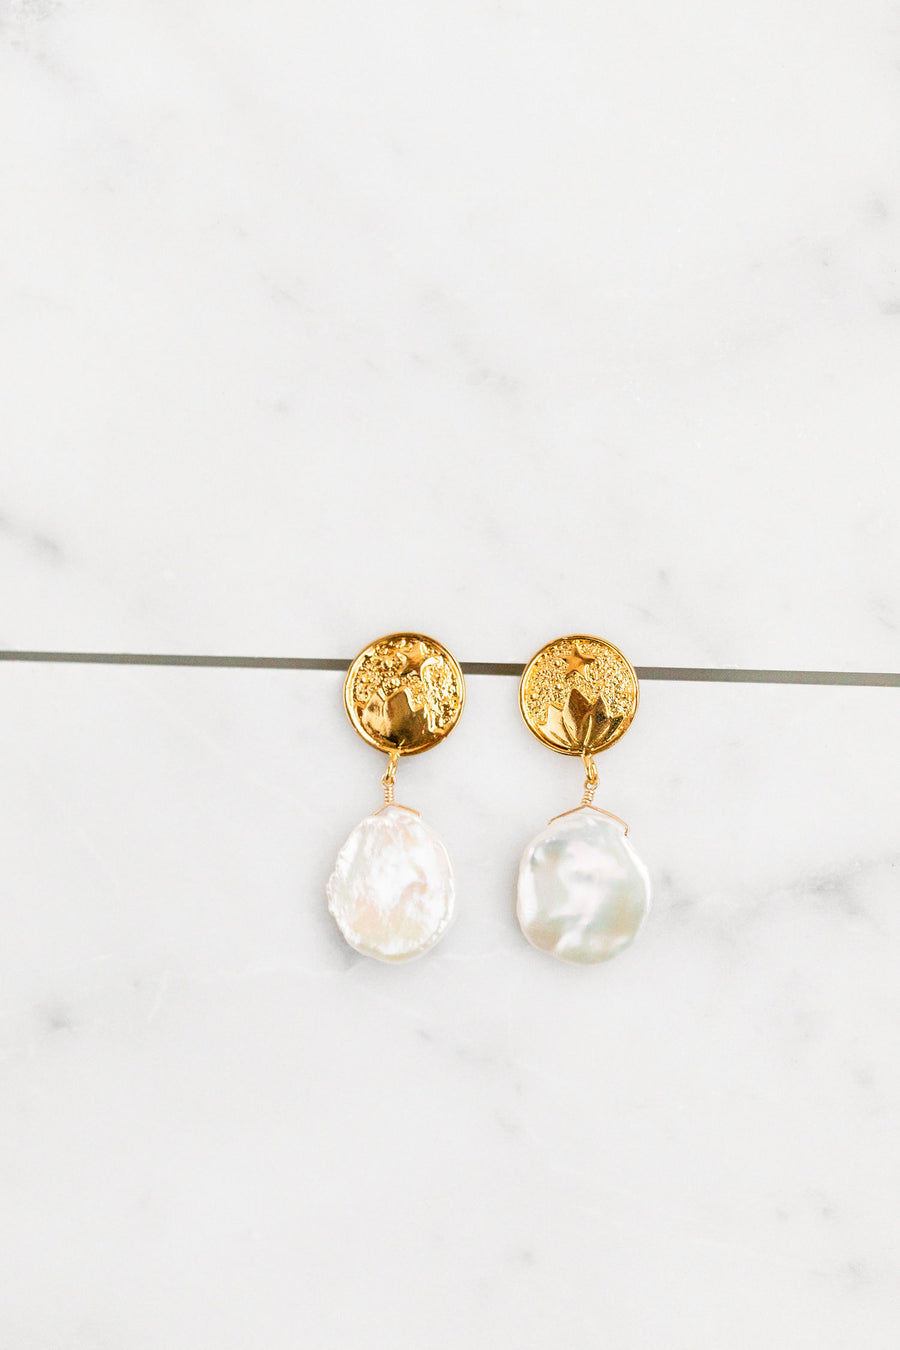 Find the perfect pair of earrings you're looking for from Charme Silkiner! These 14k gold + pearl drop earrings are seriously eye-catching and stunning. Perfect to dress or dress down any outfit the Ravel Earrings are the perfect must have for everyone!